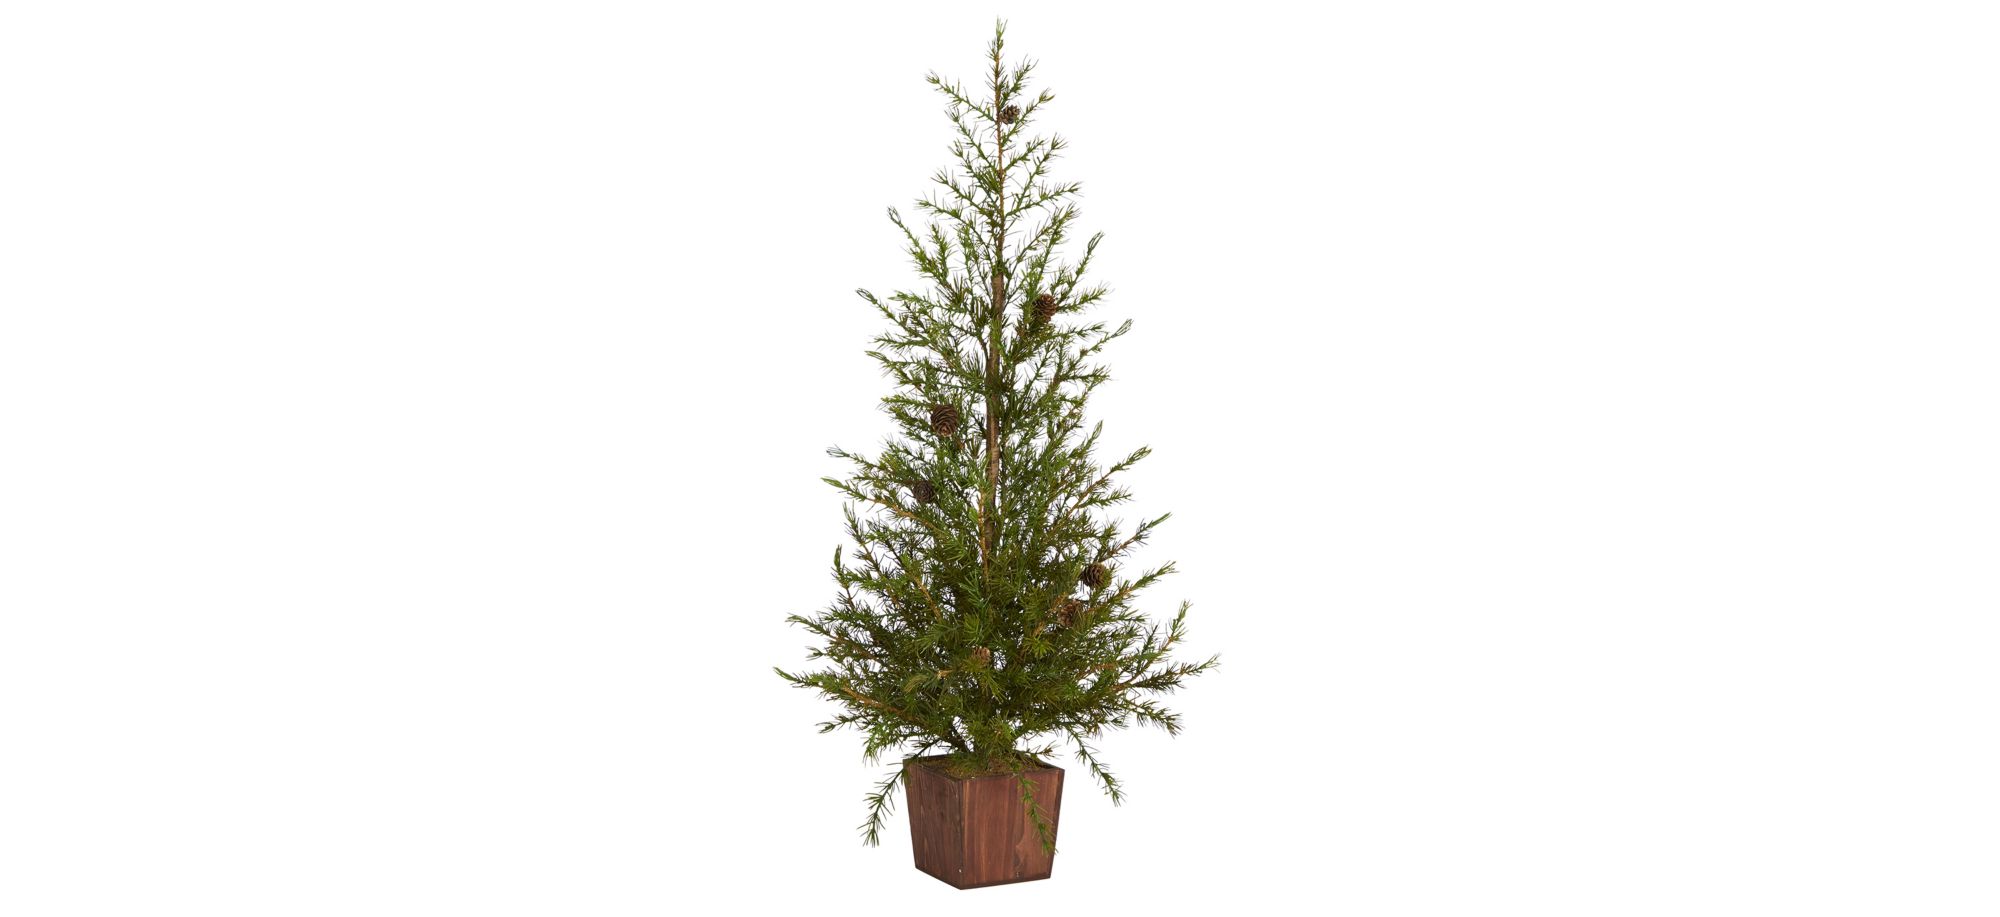 3ft. Alpine "Natural Look" Artificial Christmas Tree w/ Wood Planter in Green by Bellanest